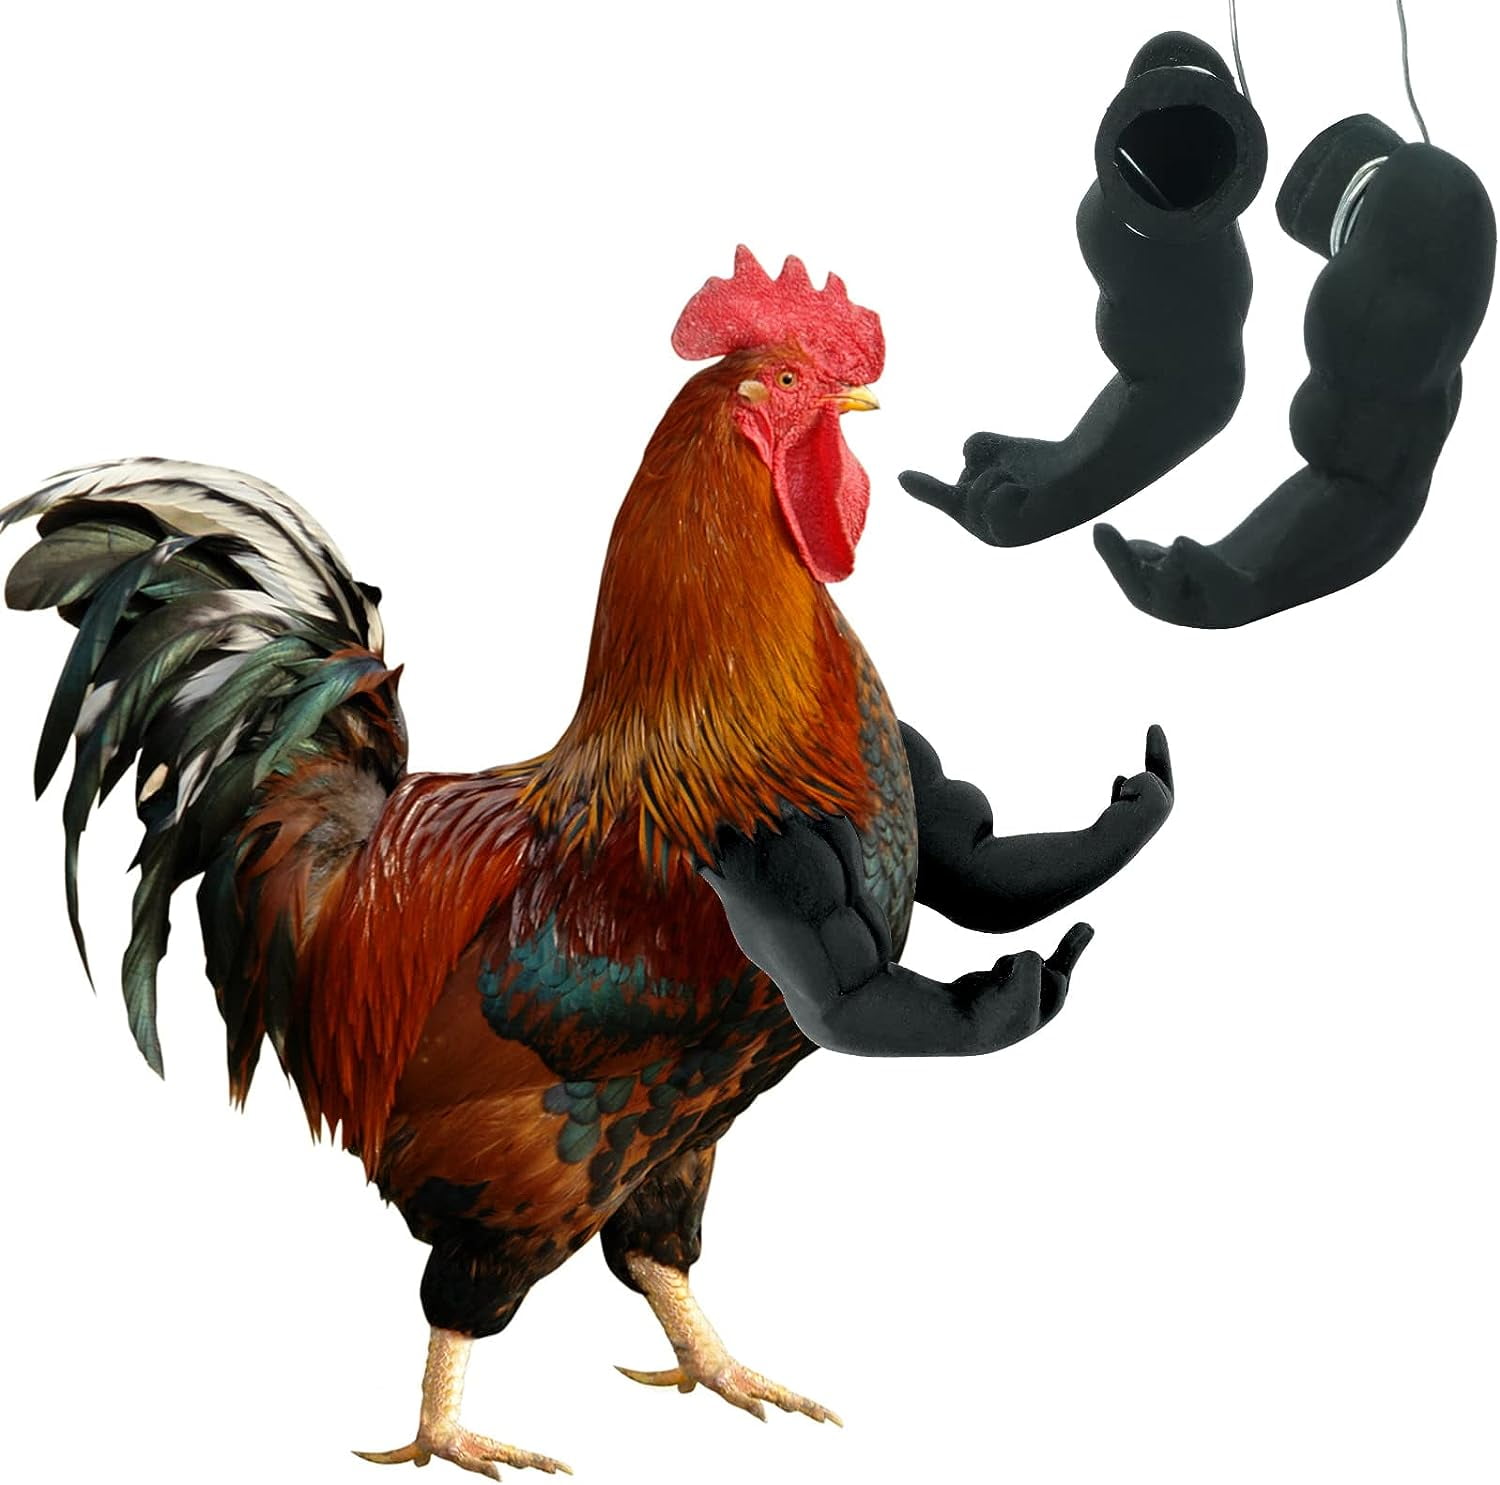 FUAMEY Muscle Chicken Arms Toys for Chickens to Wear, Funny Costume Fist  Fighting Arms Toy for Pet Prank Themed Party, Artificial Arms Decorations  Costume Cosplay for Chickens Rooster Hens Upgraded version